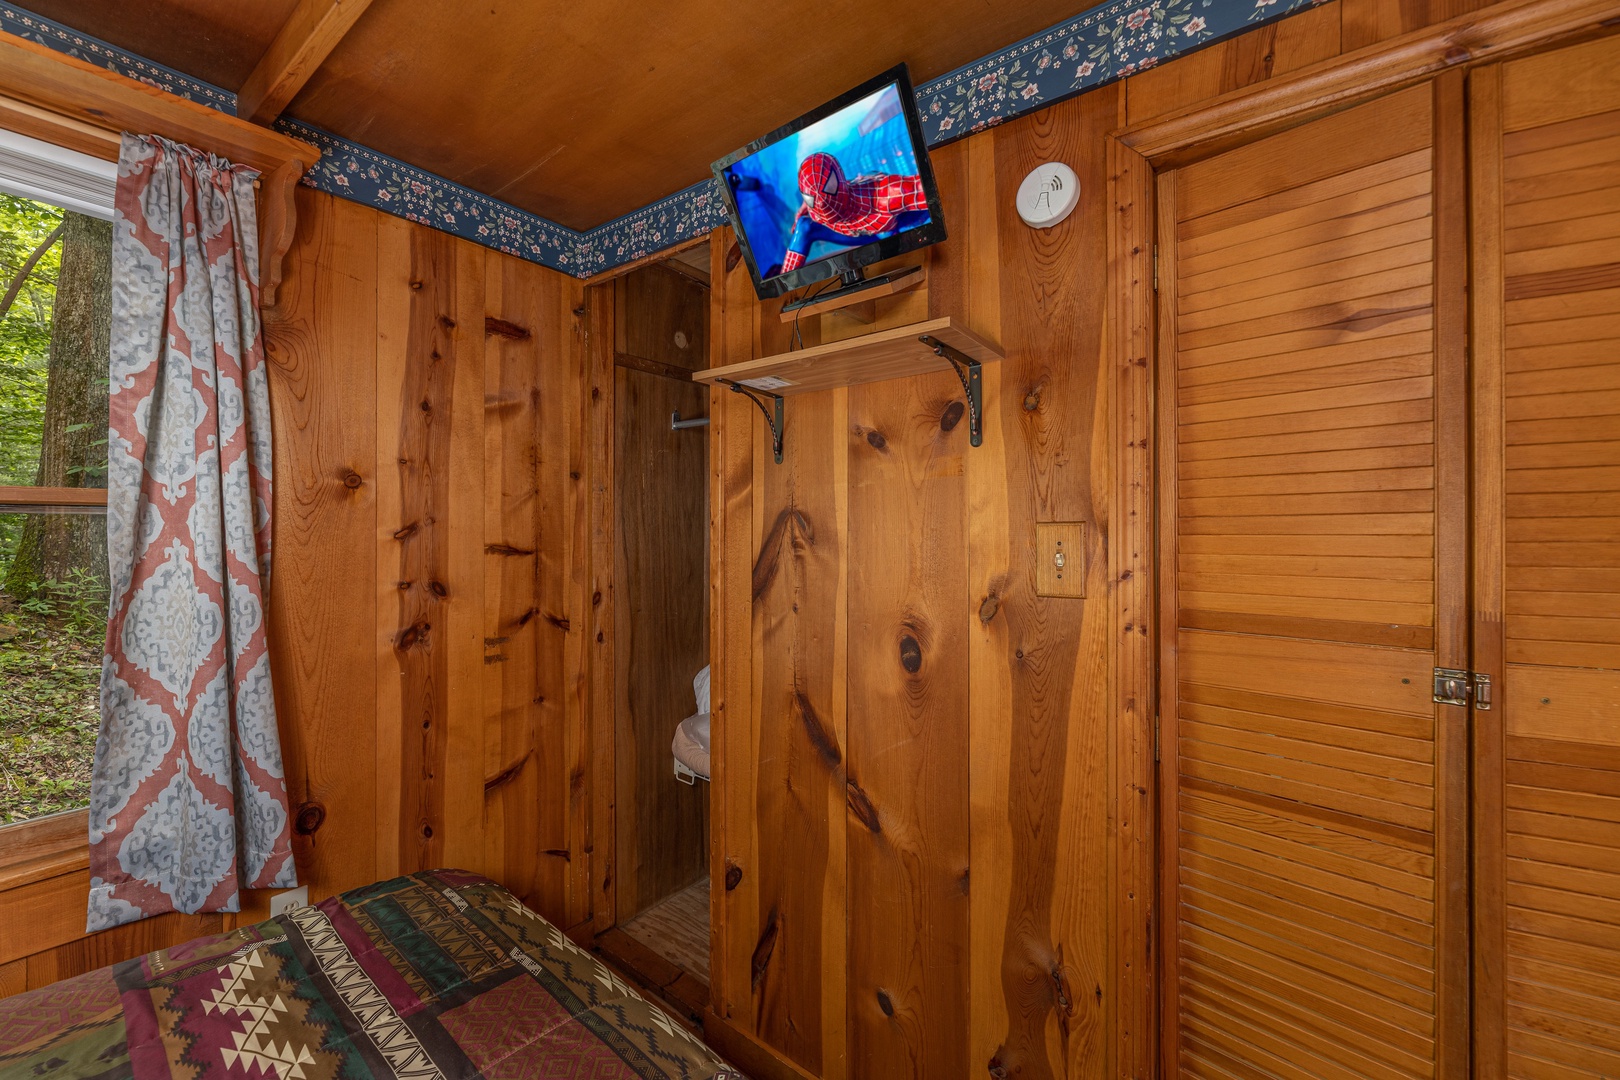 TV and closet in a bedroom at Heavenly Hideaway, a 2-bedroom cabin rental located in Gatlinburg